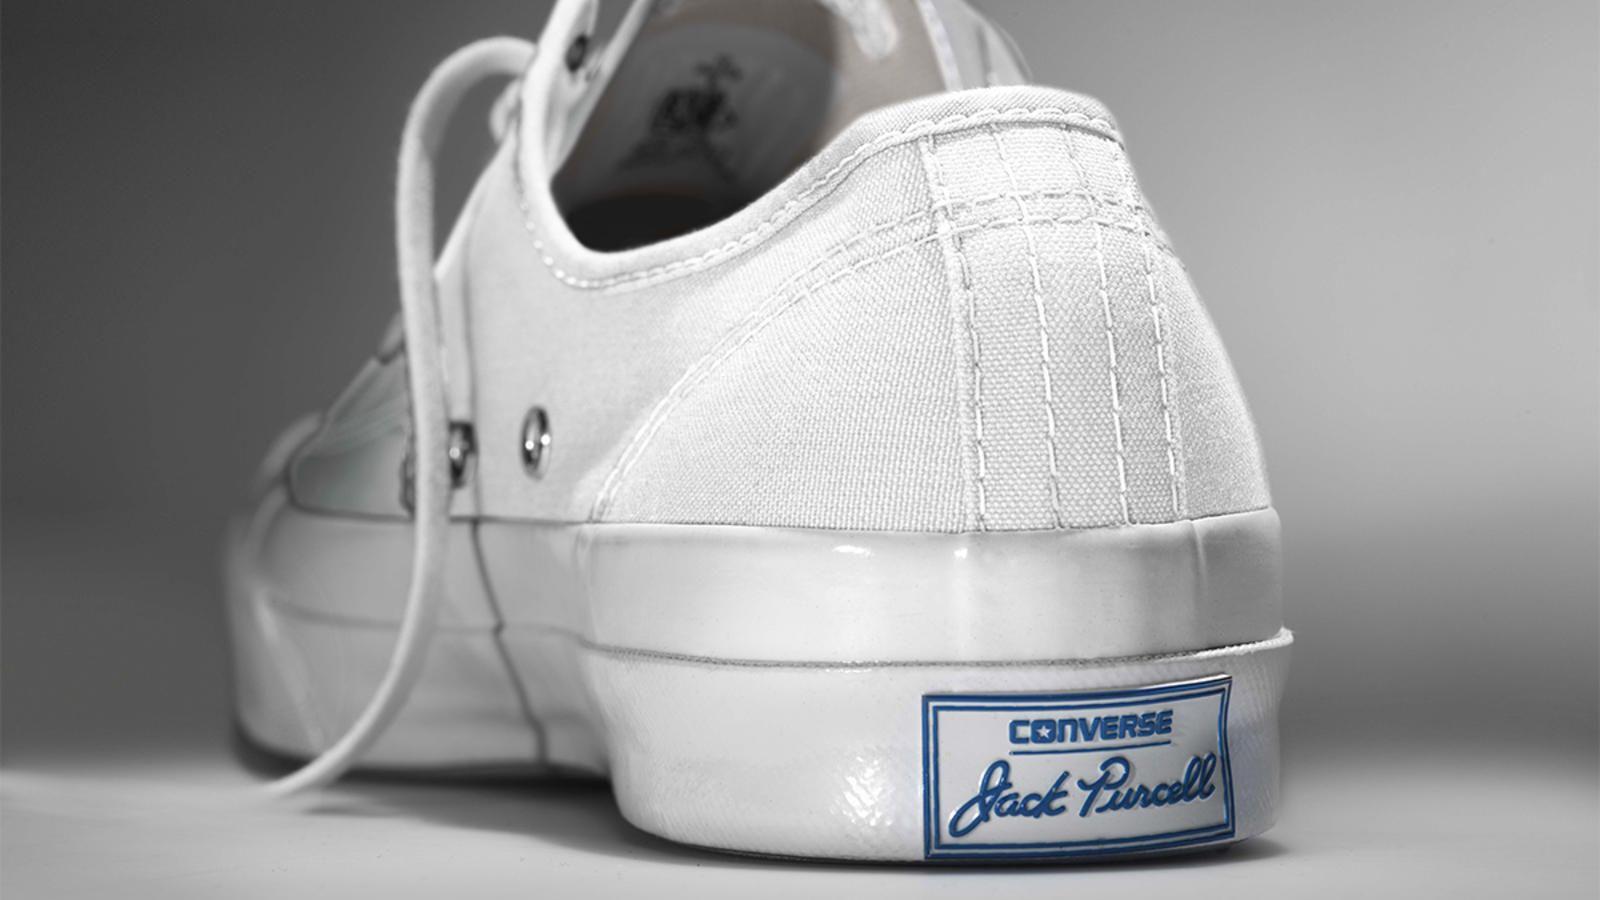 Purcell Logo - CONVERSE DEBUTS THE JACK PURCELL SIGNATURE SNEAKER - Nike News